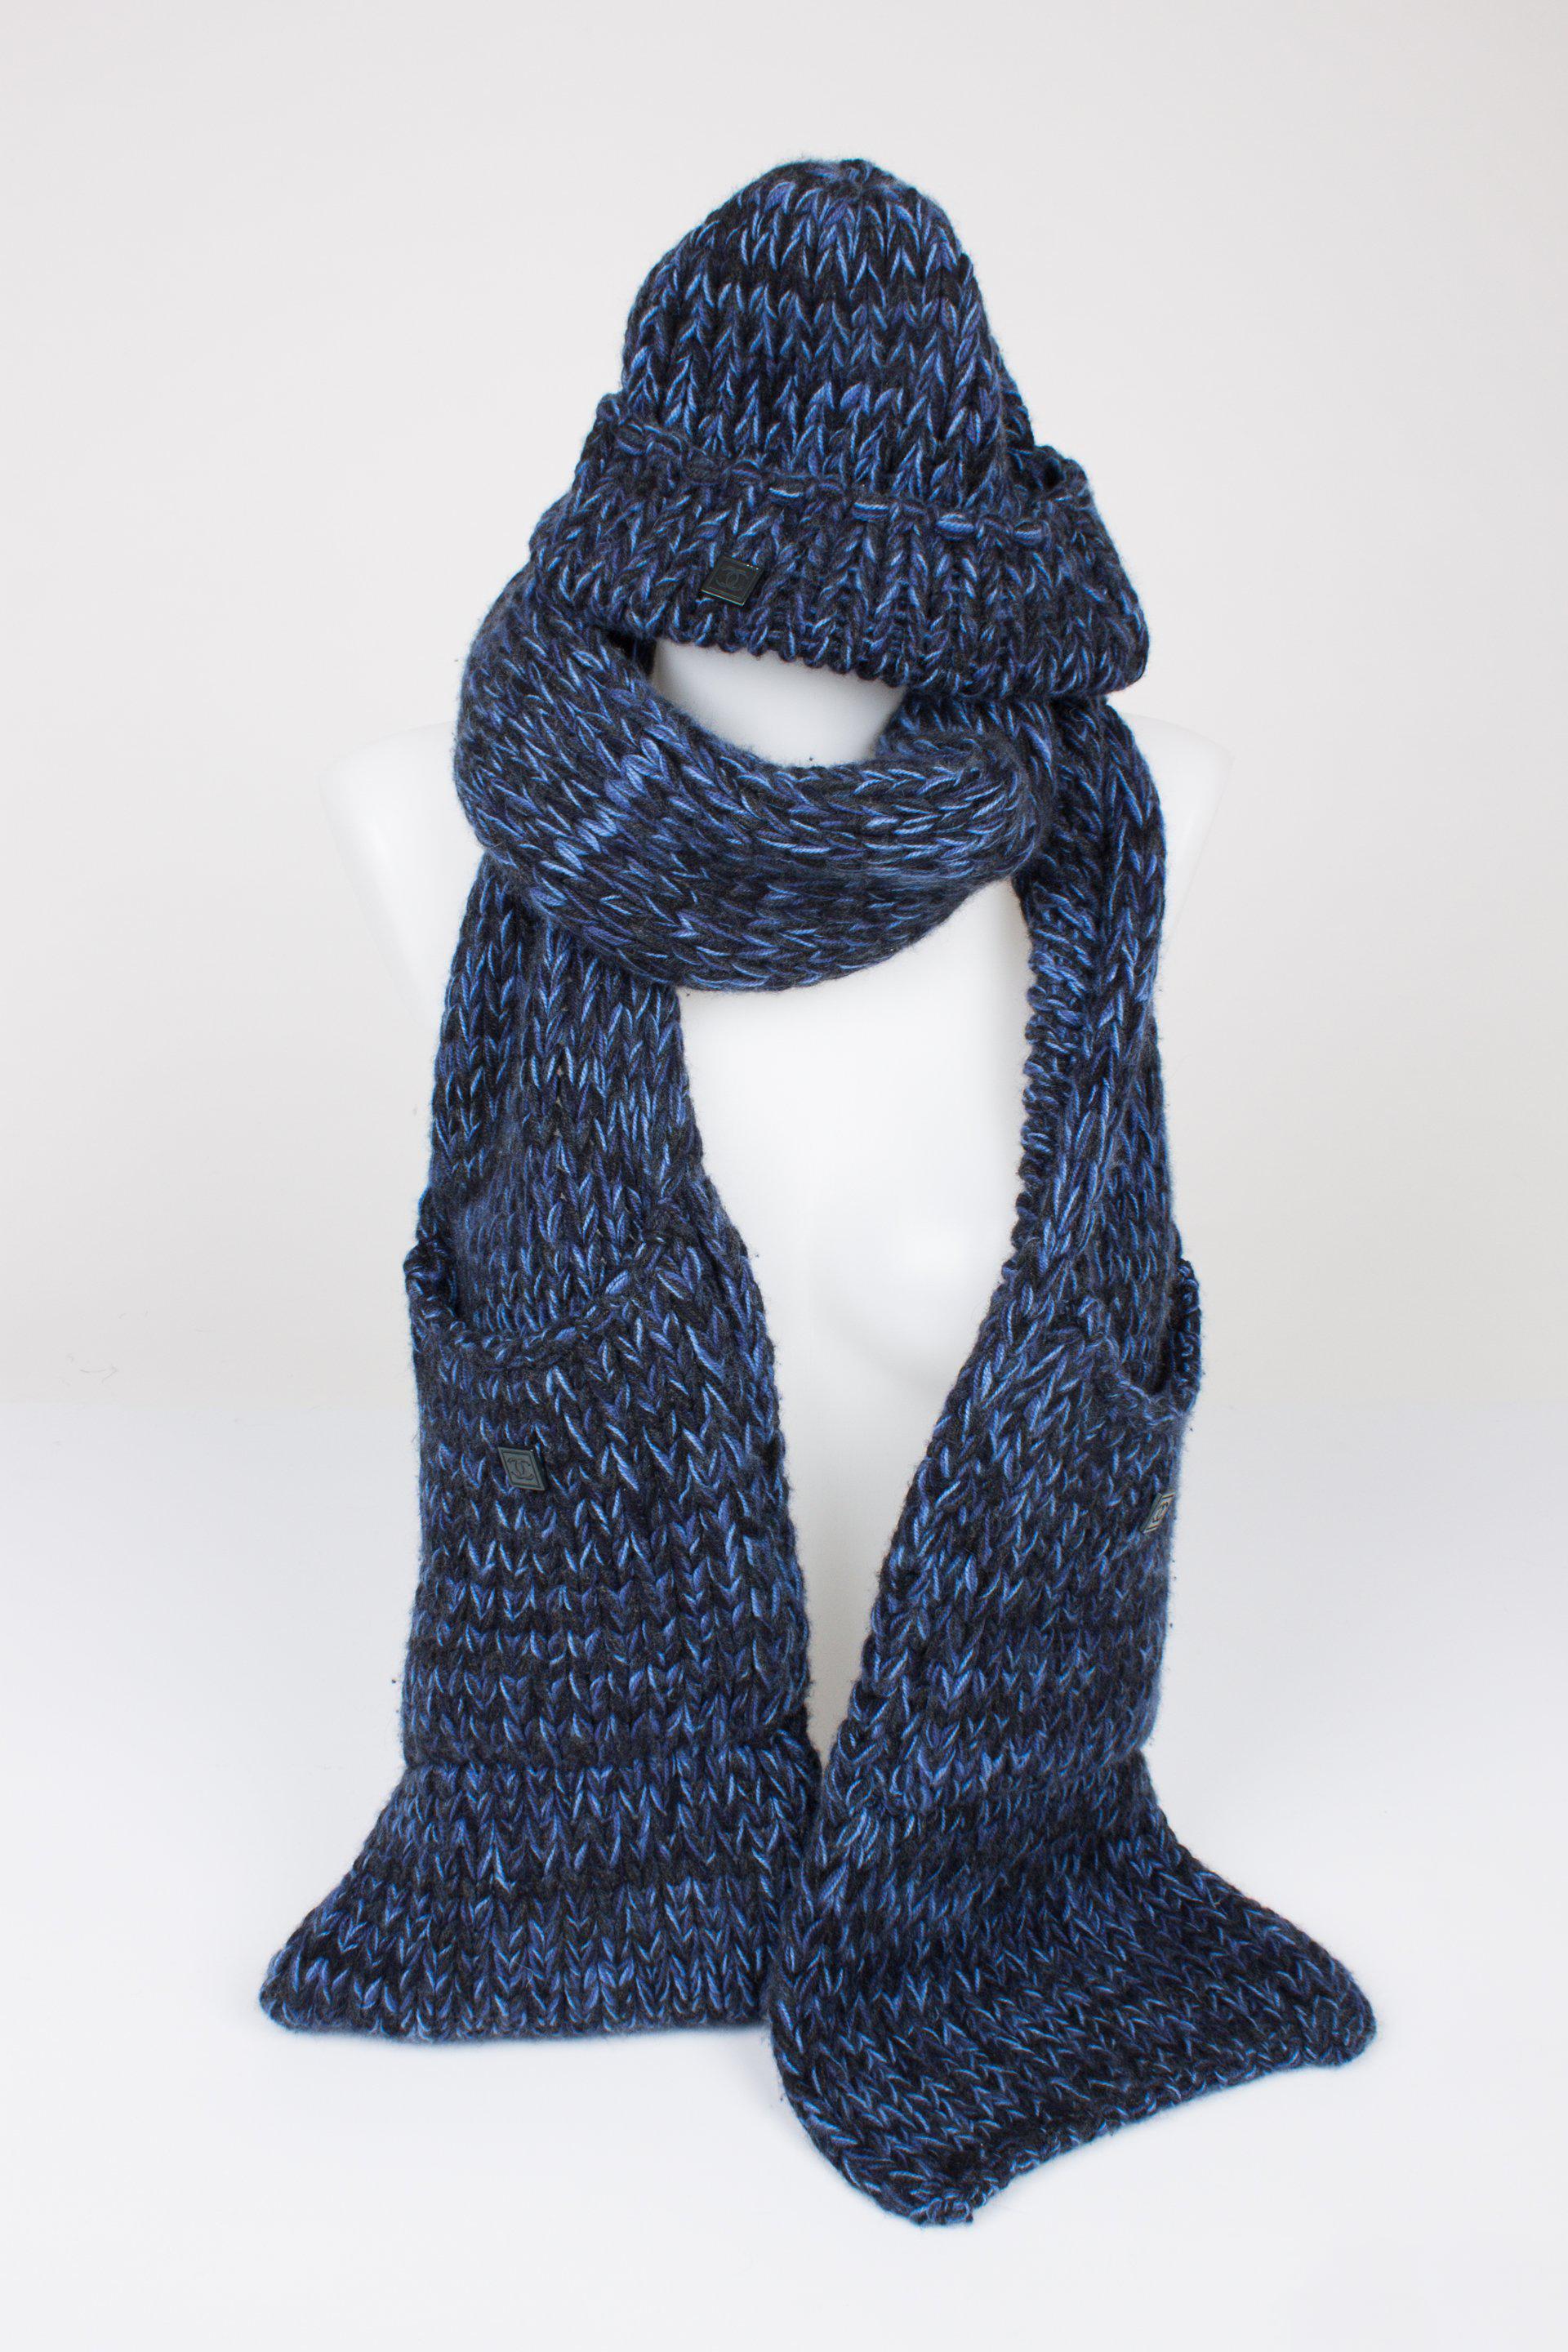 Chanel Knit Hat & Scarf - black/blue cashmere In New Condition For Sale In Baarn, NL